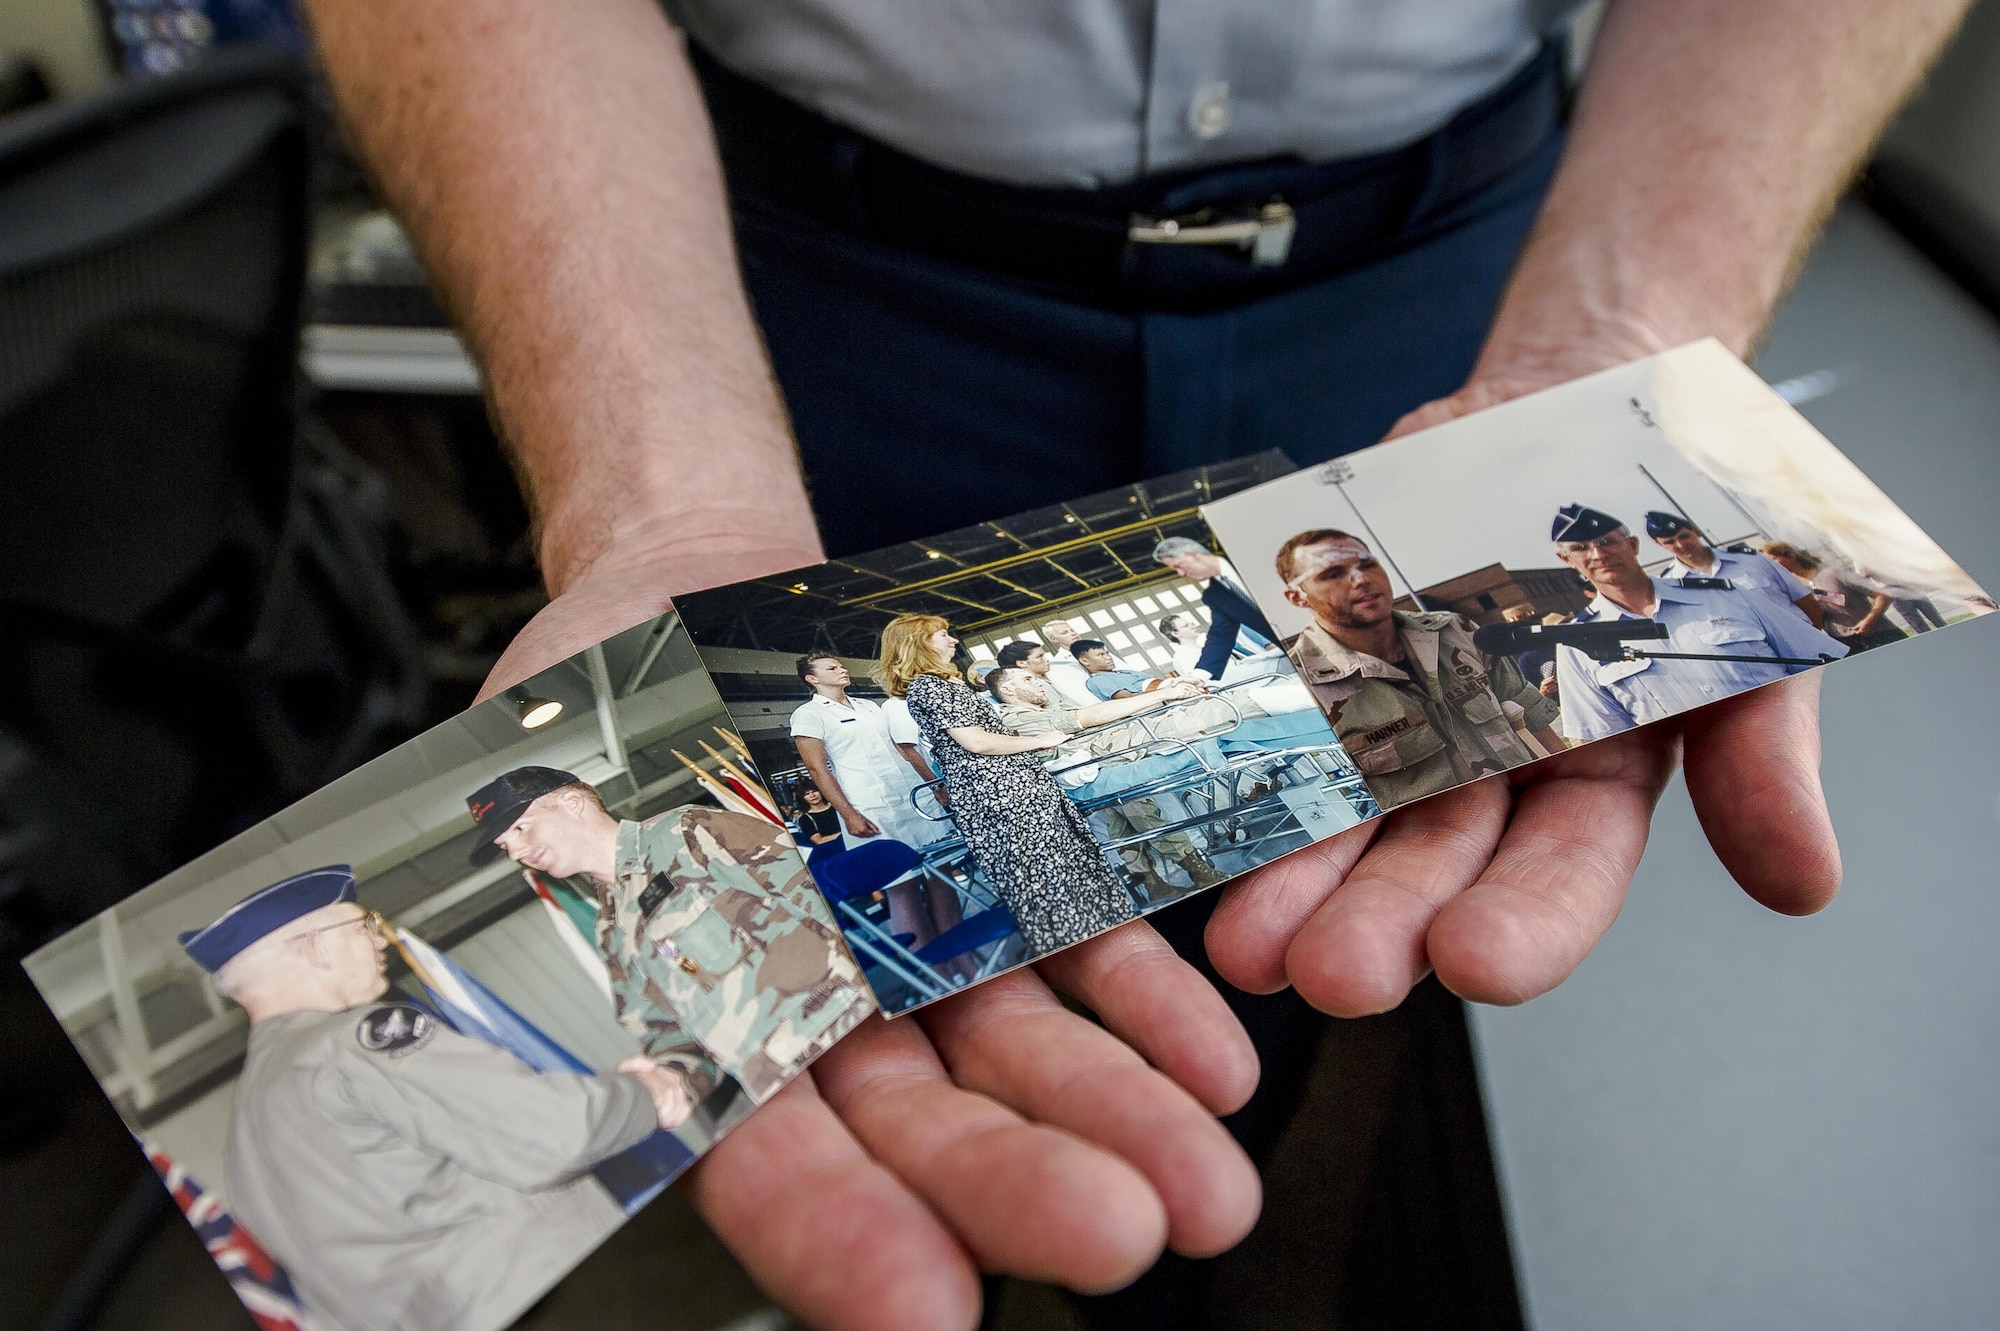 Col. Michael Harner, the associate director of civil engineers at the Pentagon in Washington, D.C., shows photos of himself June 9, 2016, following the terrorist attack on the Khobar Towers complex in Dharan, Saudi Arabia, on June 25, 1996. The photos included him receiving his Purple Heart and meeting former President Bill Clinton just days after the attack at Eglin Air Force Base, Fla. The attack killed 19 Airmen and injured more than 350 people. (U.S. Air Force photo/Staff Sgt. Christopher Gross)